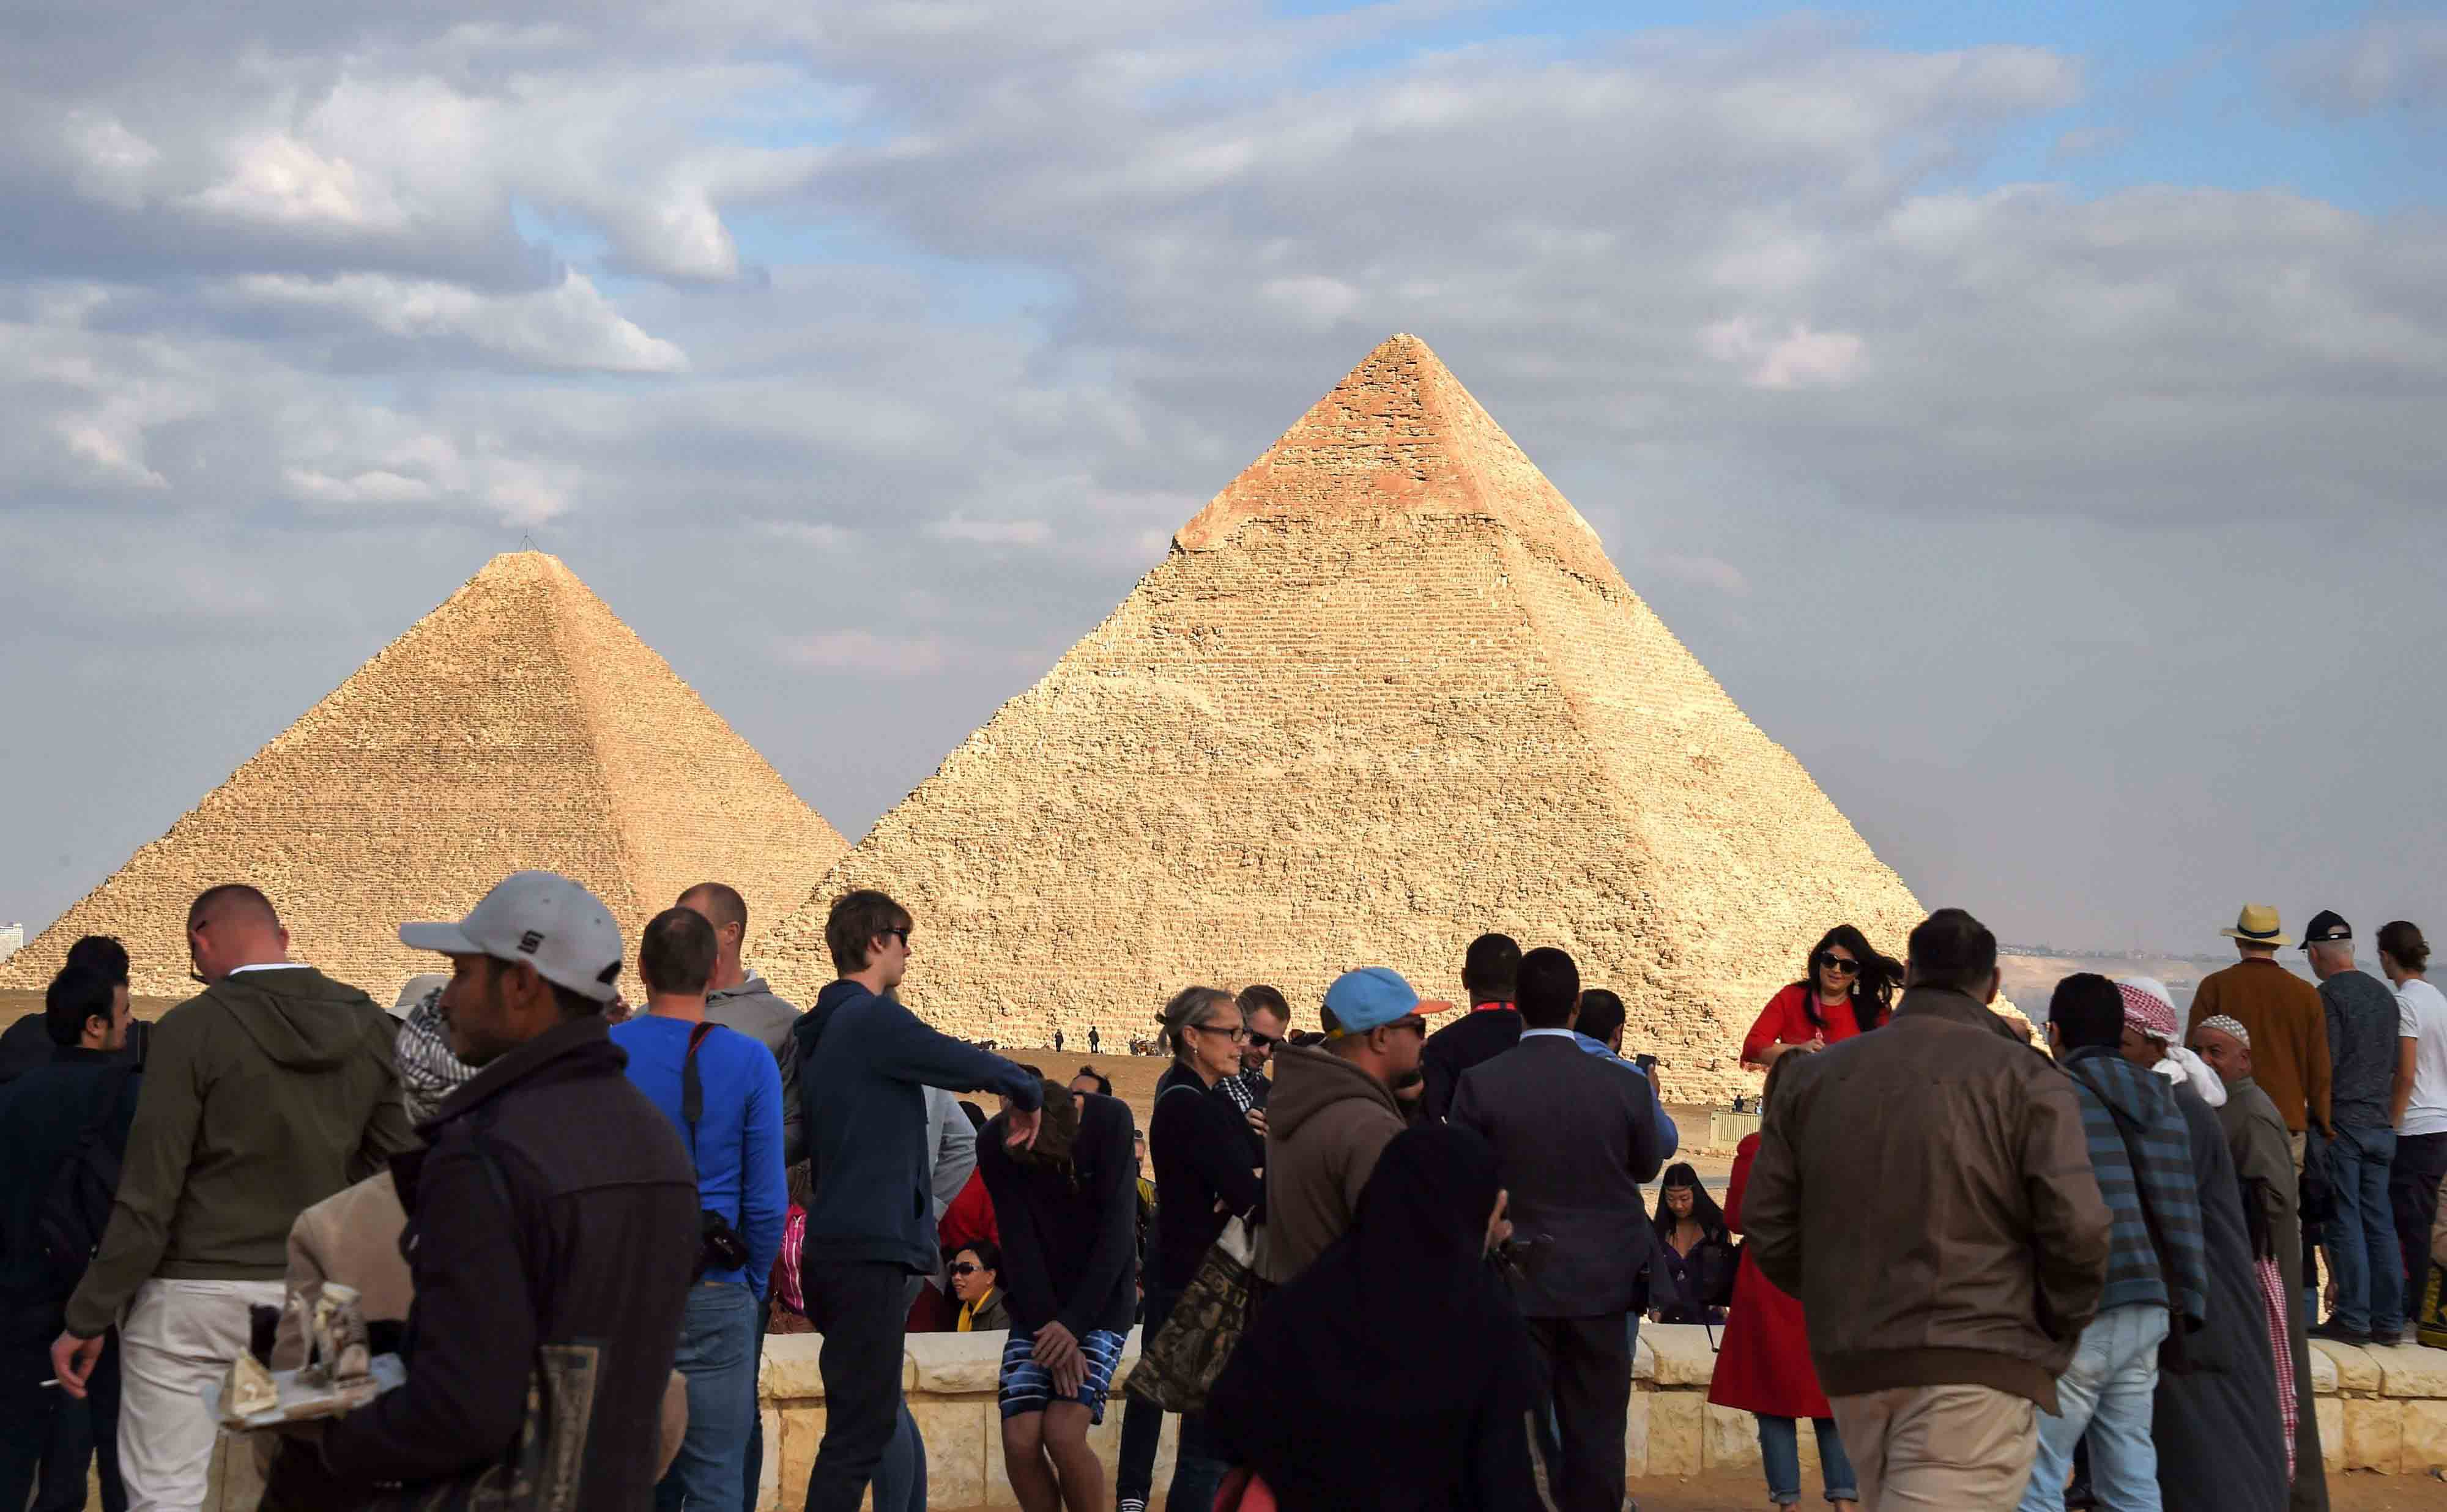 Earlier hit hard by a string of bloody attacks and unrest, visitor numbers to Egypt have more recently staged a partial recovery.